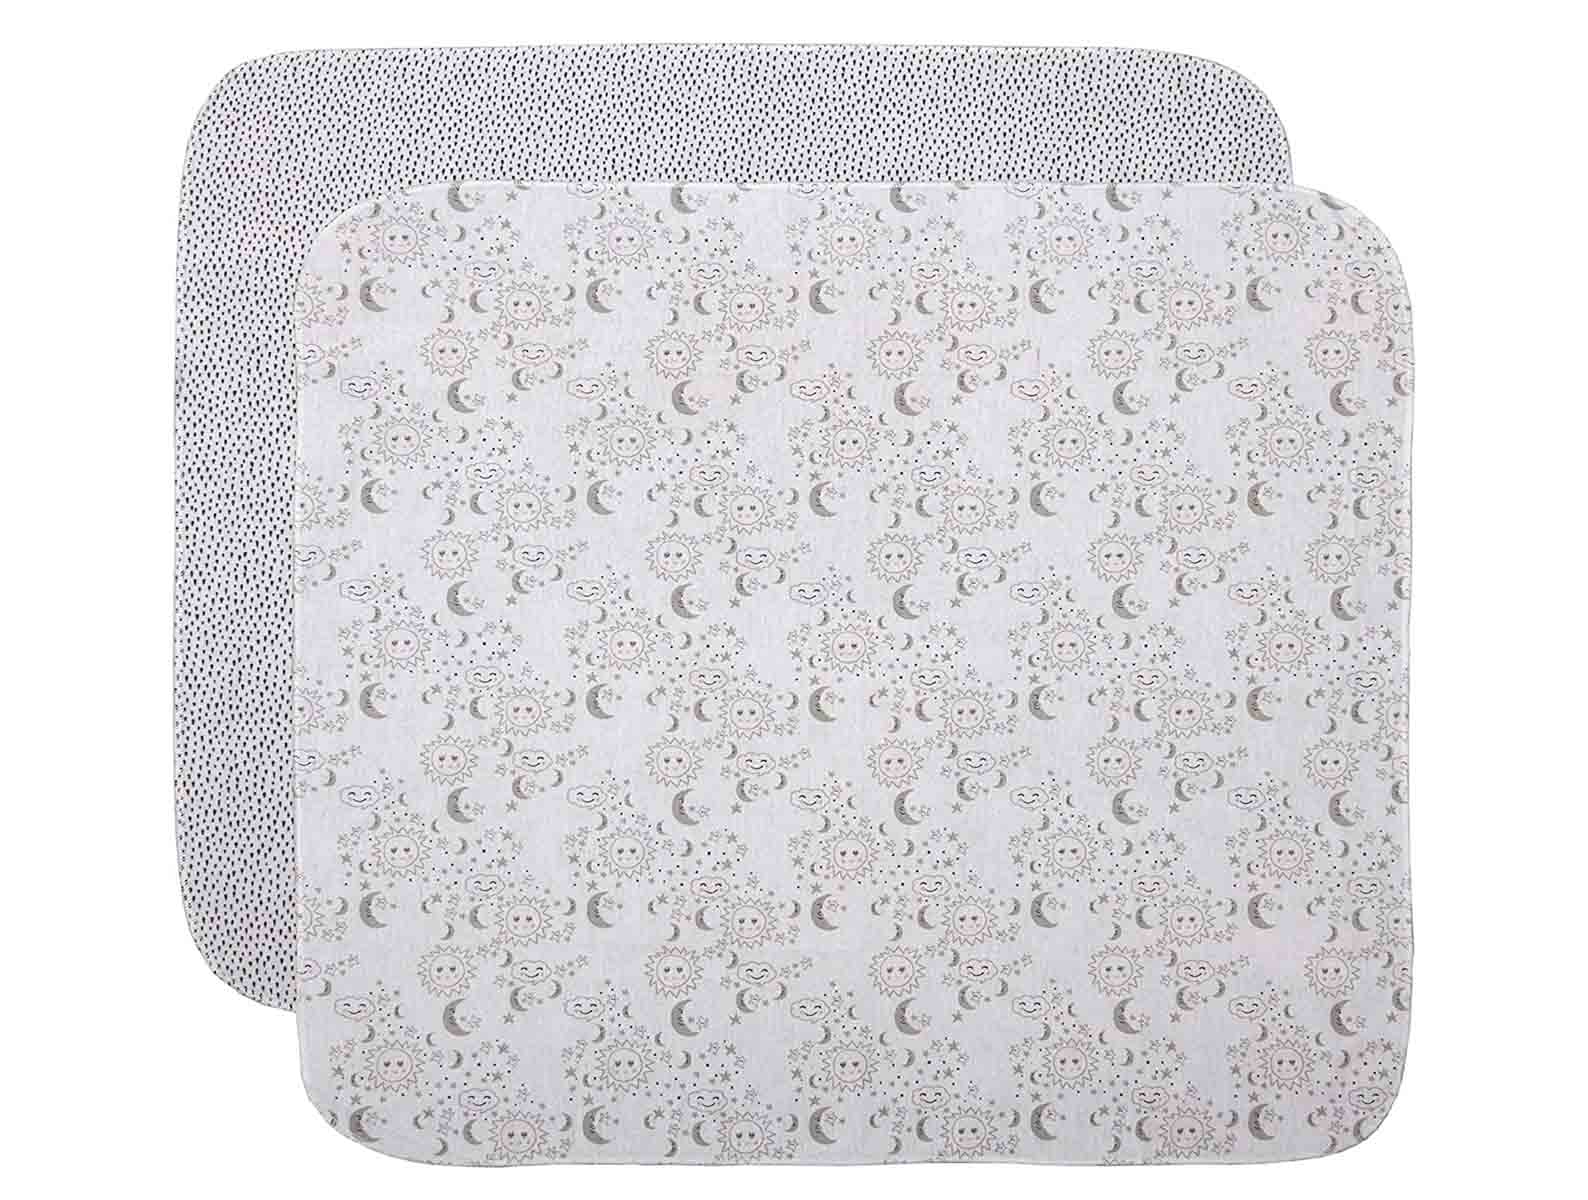 Cuddles & Cribs Baby Receiving Blankets – 100% Cotton Flannel Receiving Blankets - Sky & Drops - Pack of 2 - 30 x 30 Inches - Receiving Blankets